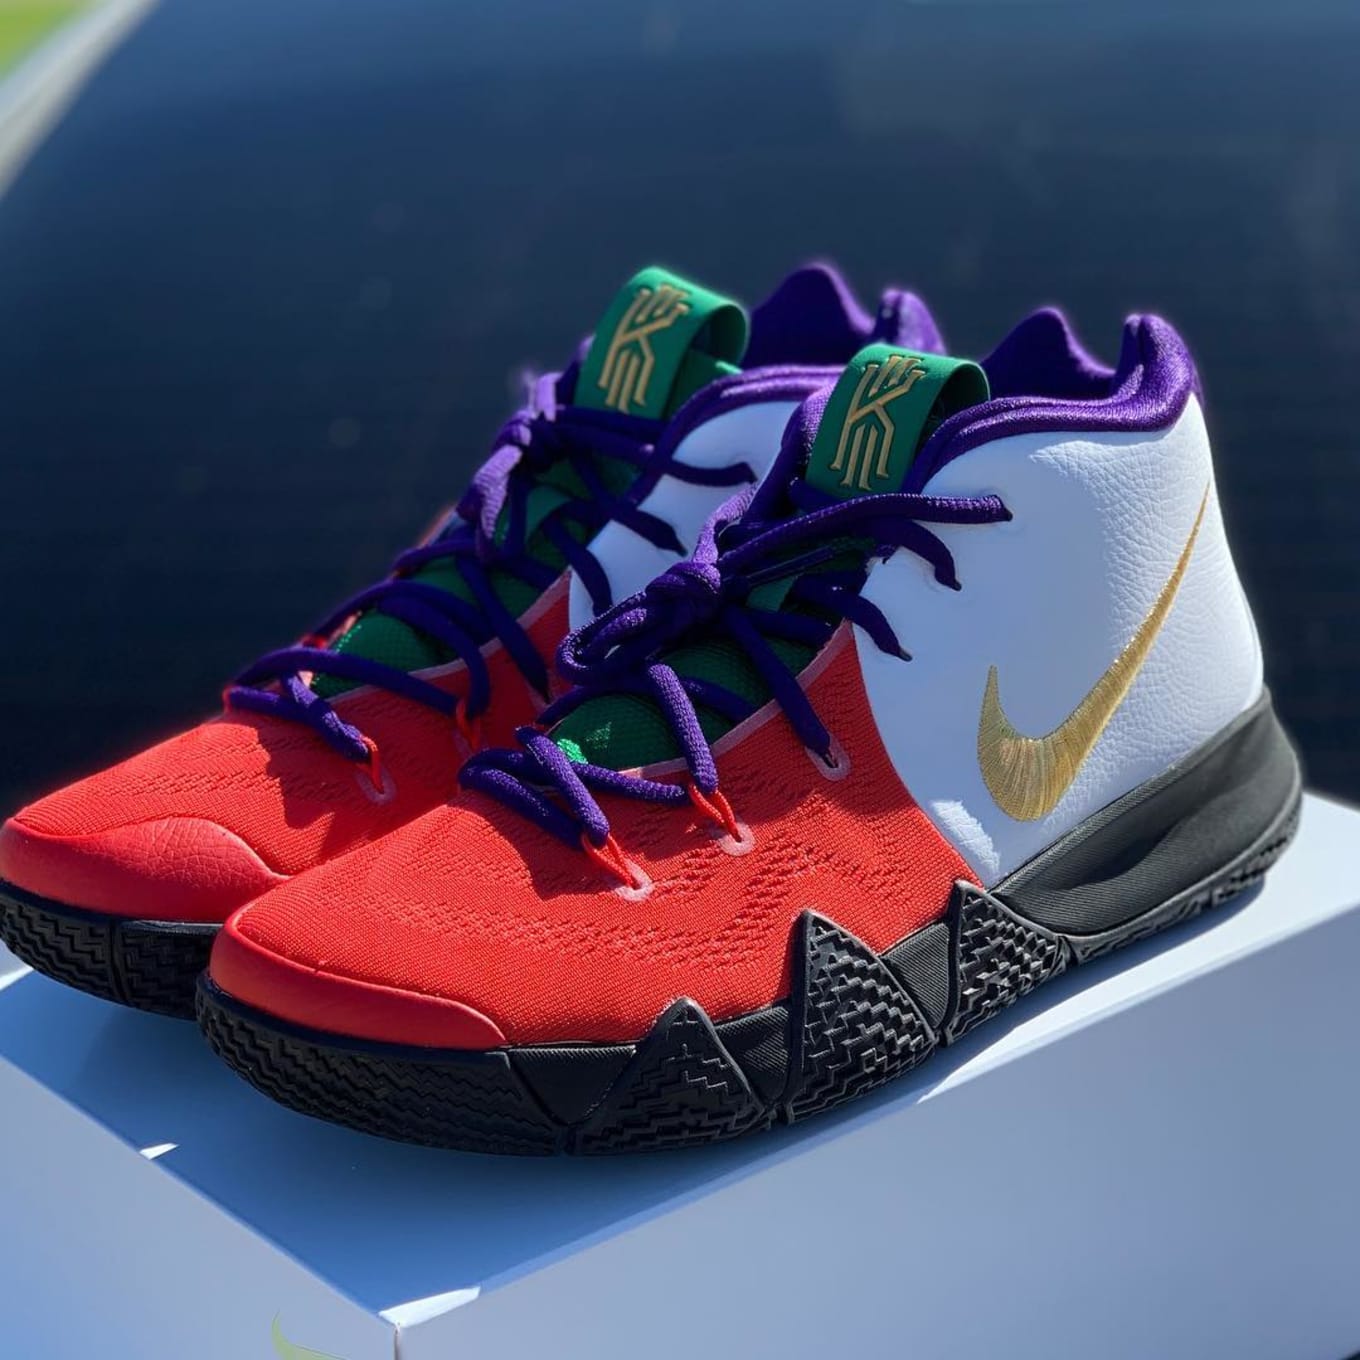 UFO Themed Nike Kyrie 5 Could Be Landing Soon Pinterest